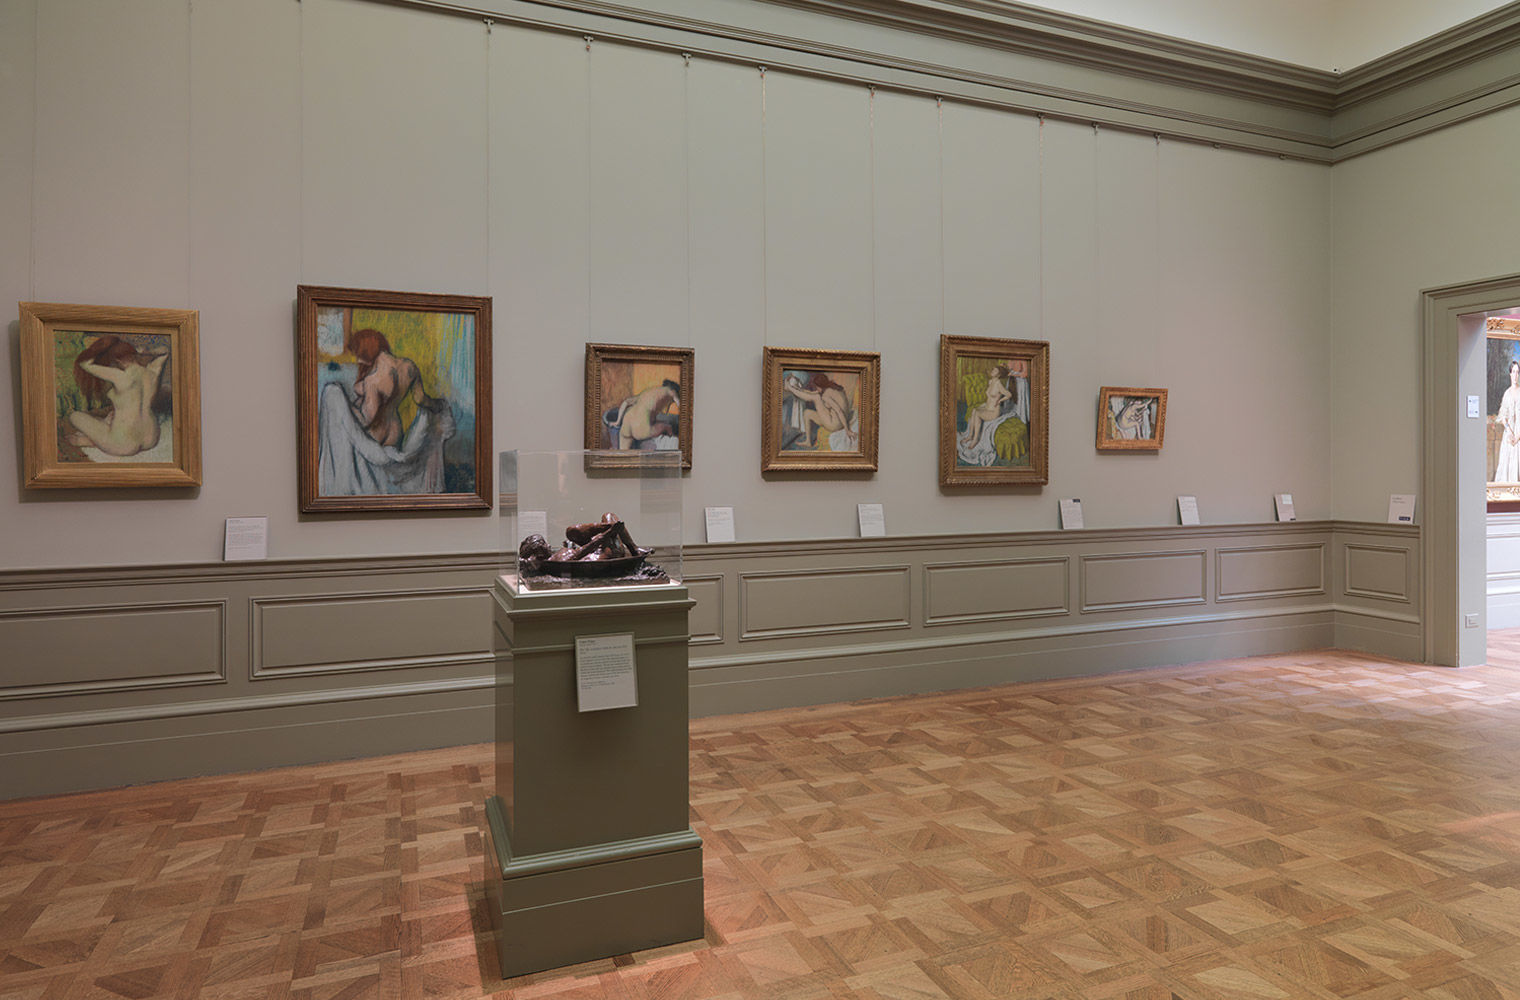 Gallery view of paintings with dancers